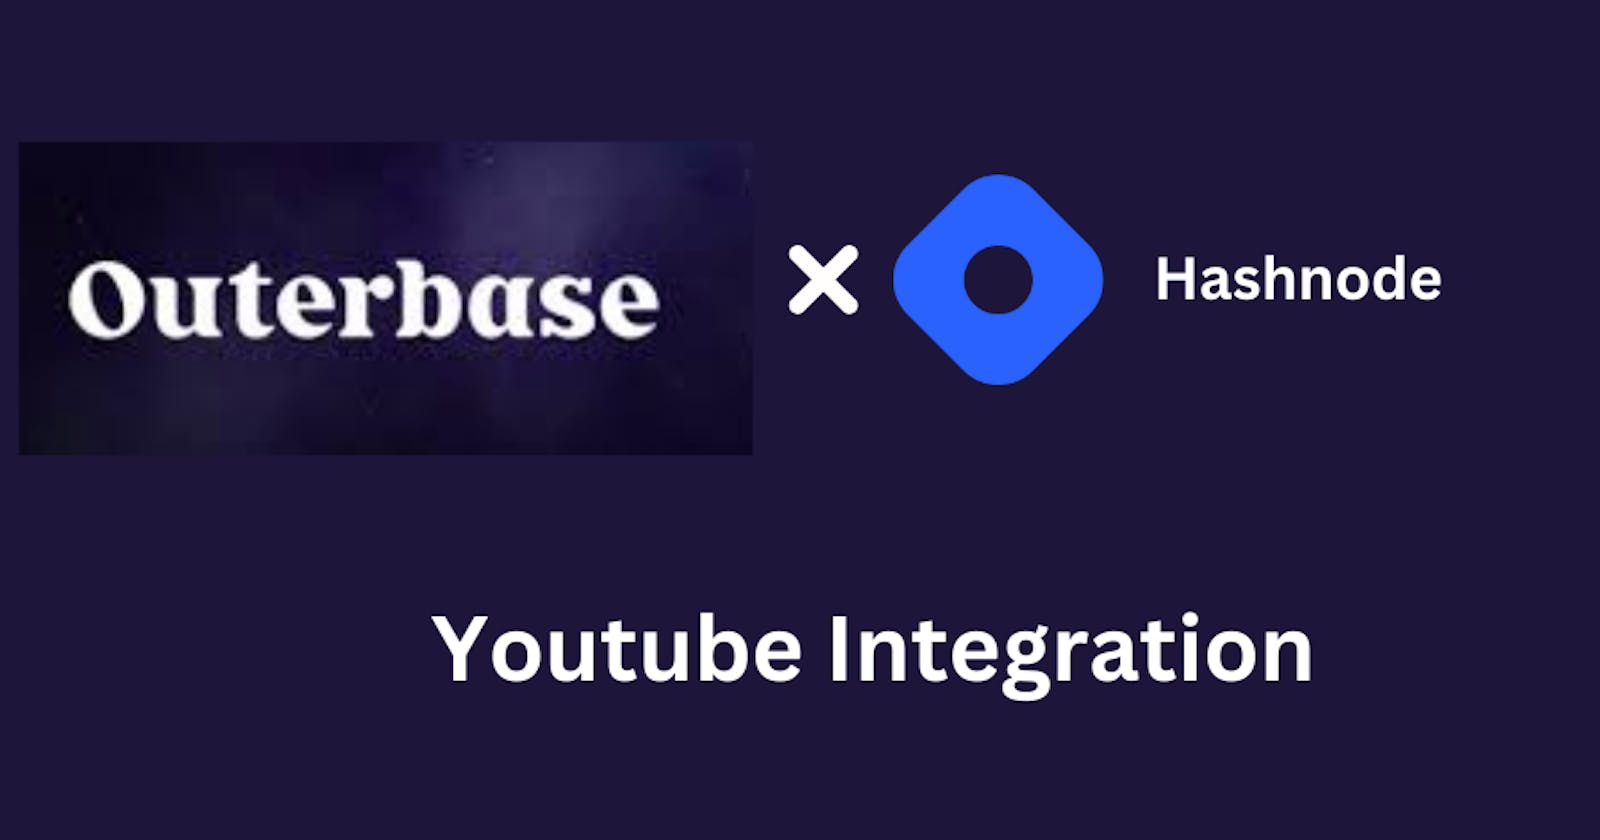 YouTube Integration in Outerbase